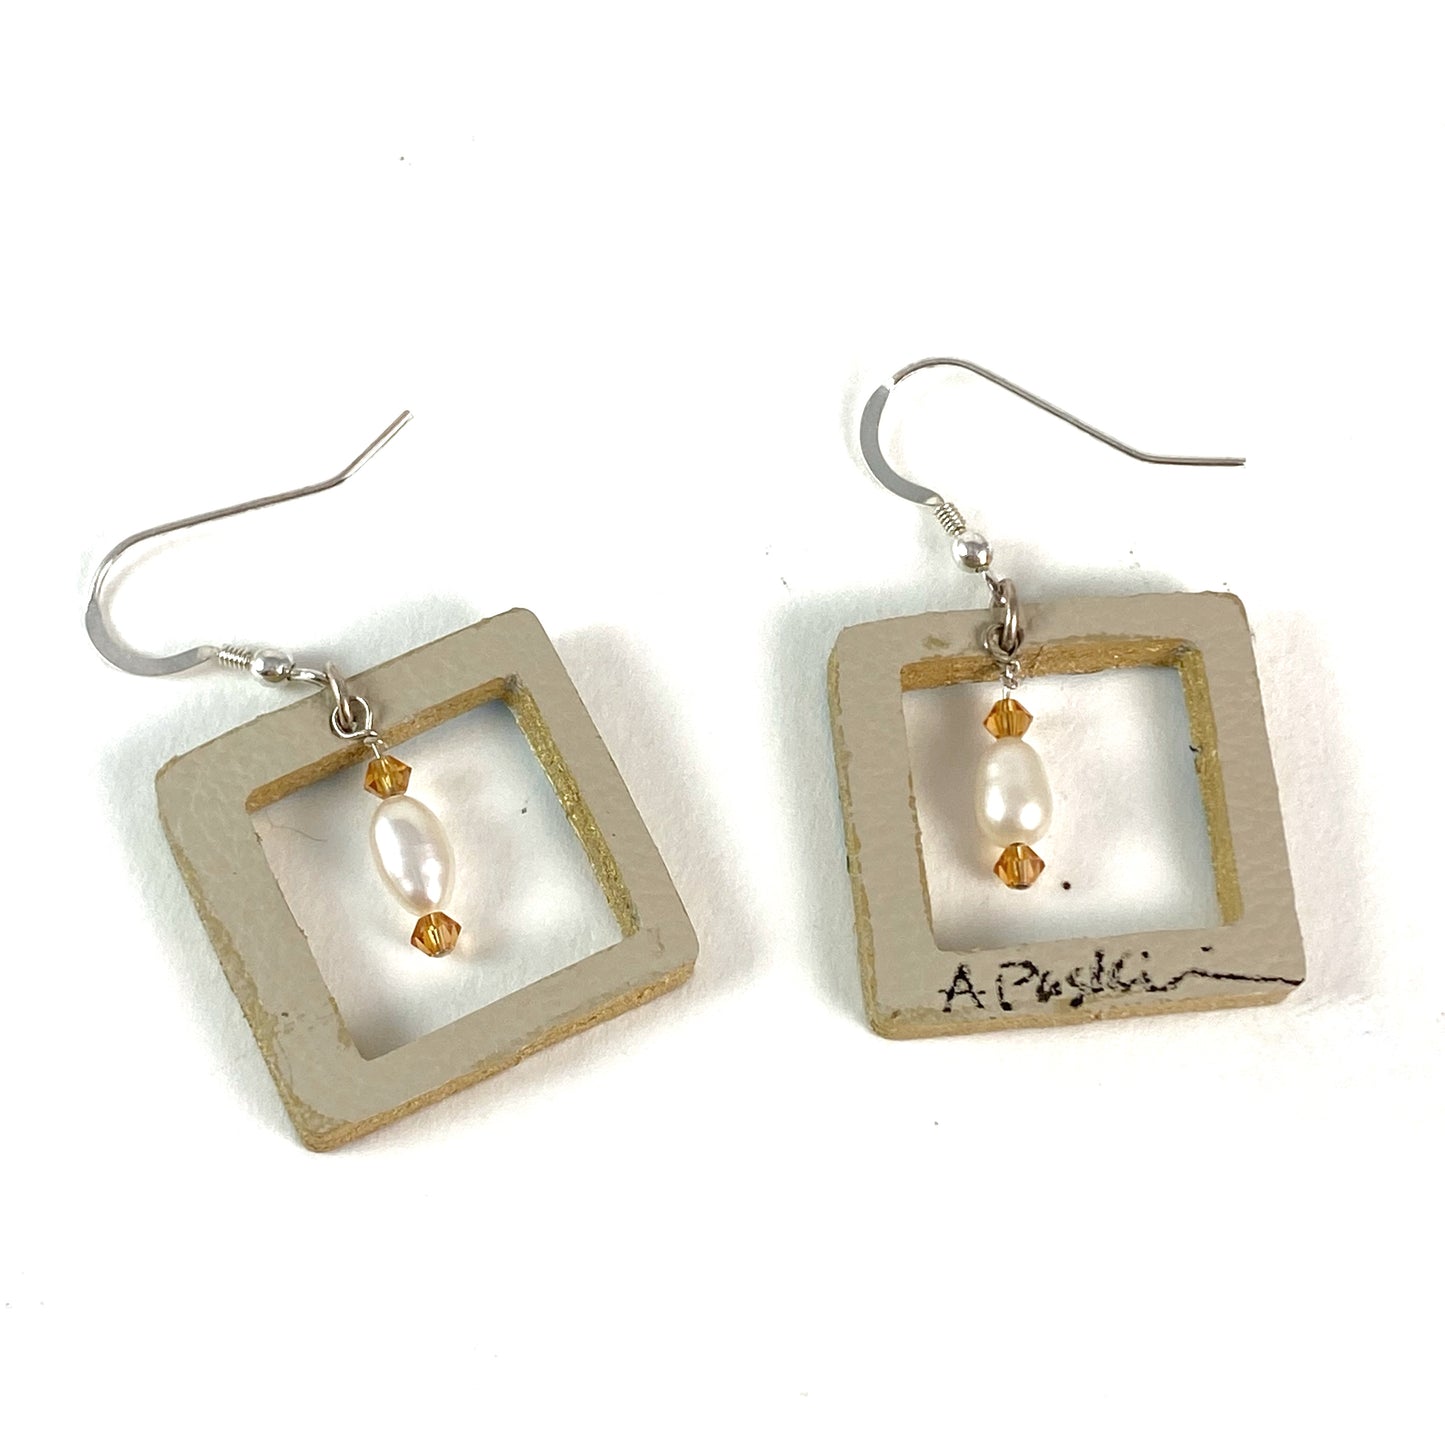 Square Beach Earrings with Pearls